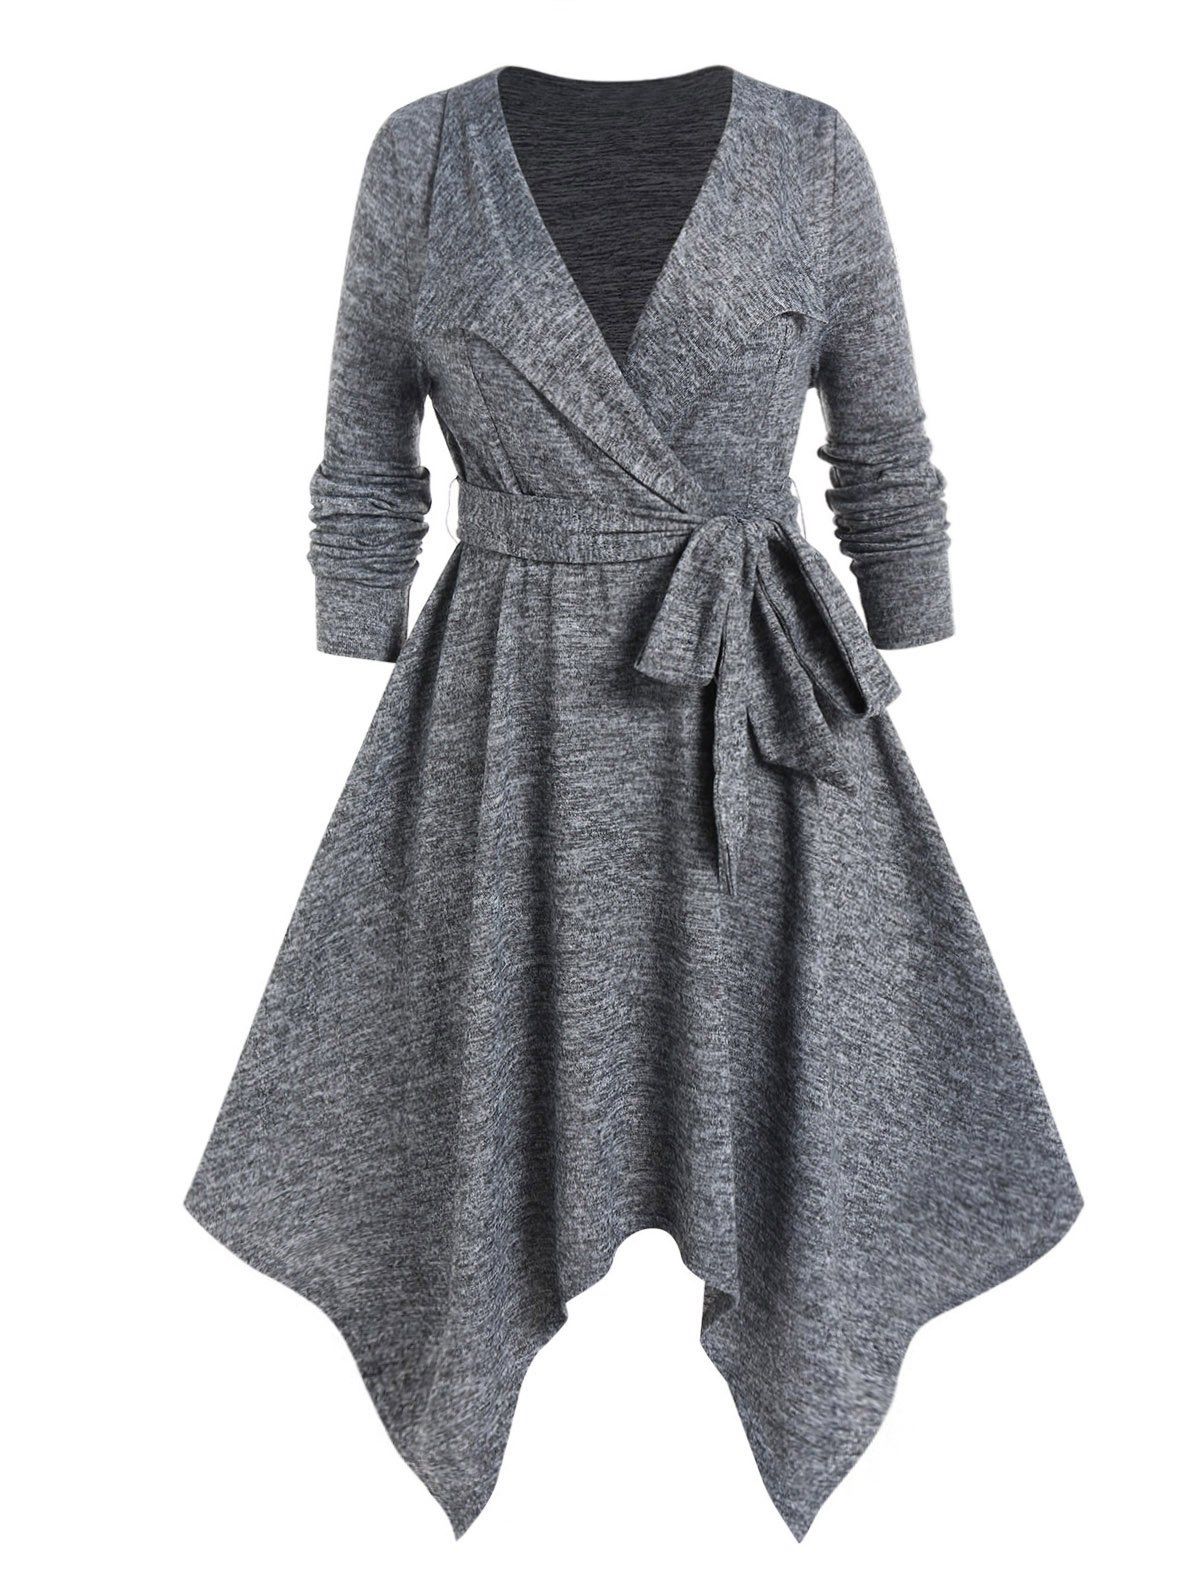 Plus Size Dress Space Dye Belted Plunging Neck Long Sleeve Midi Handkerchief Dress - GRAY 3X